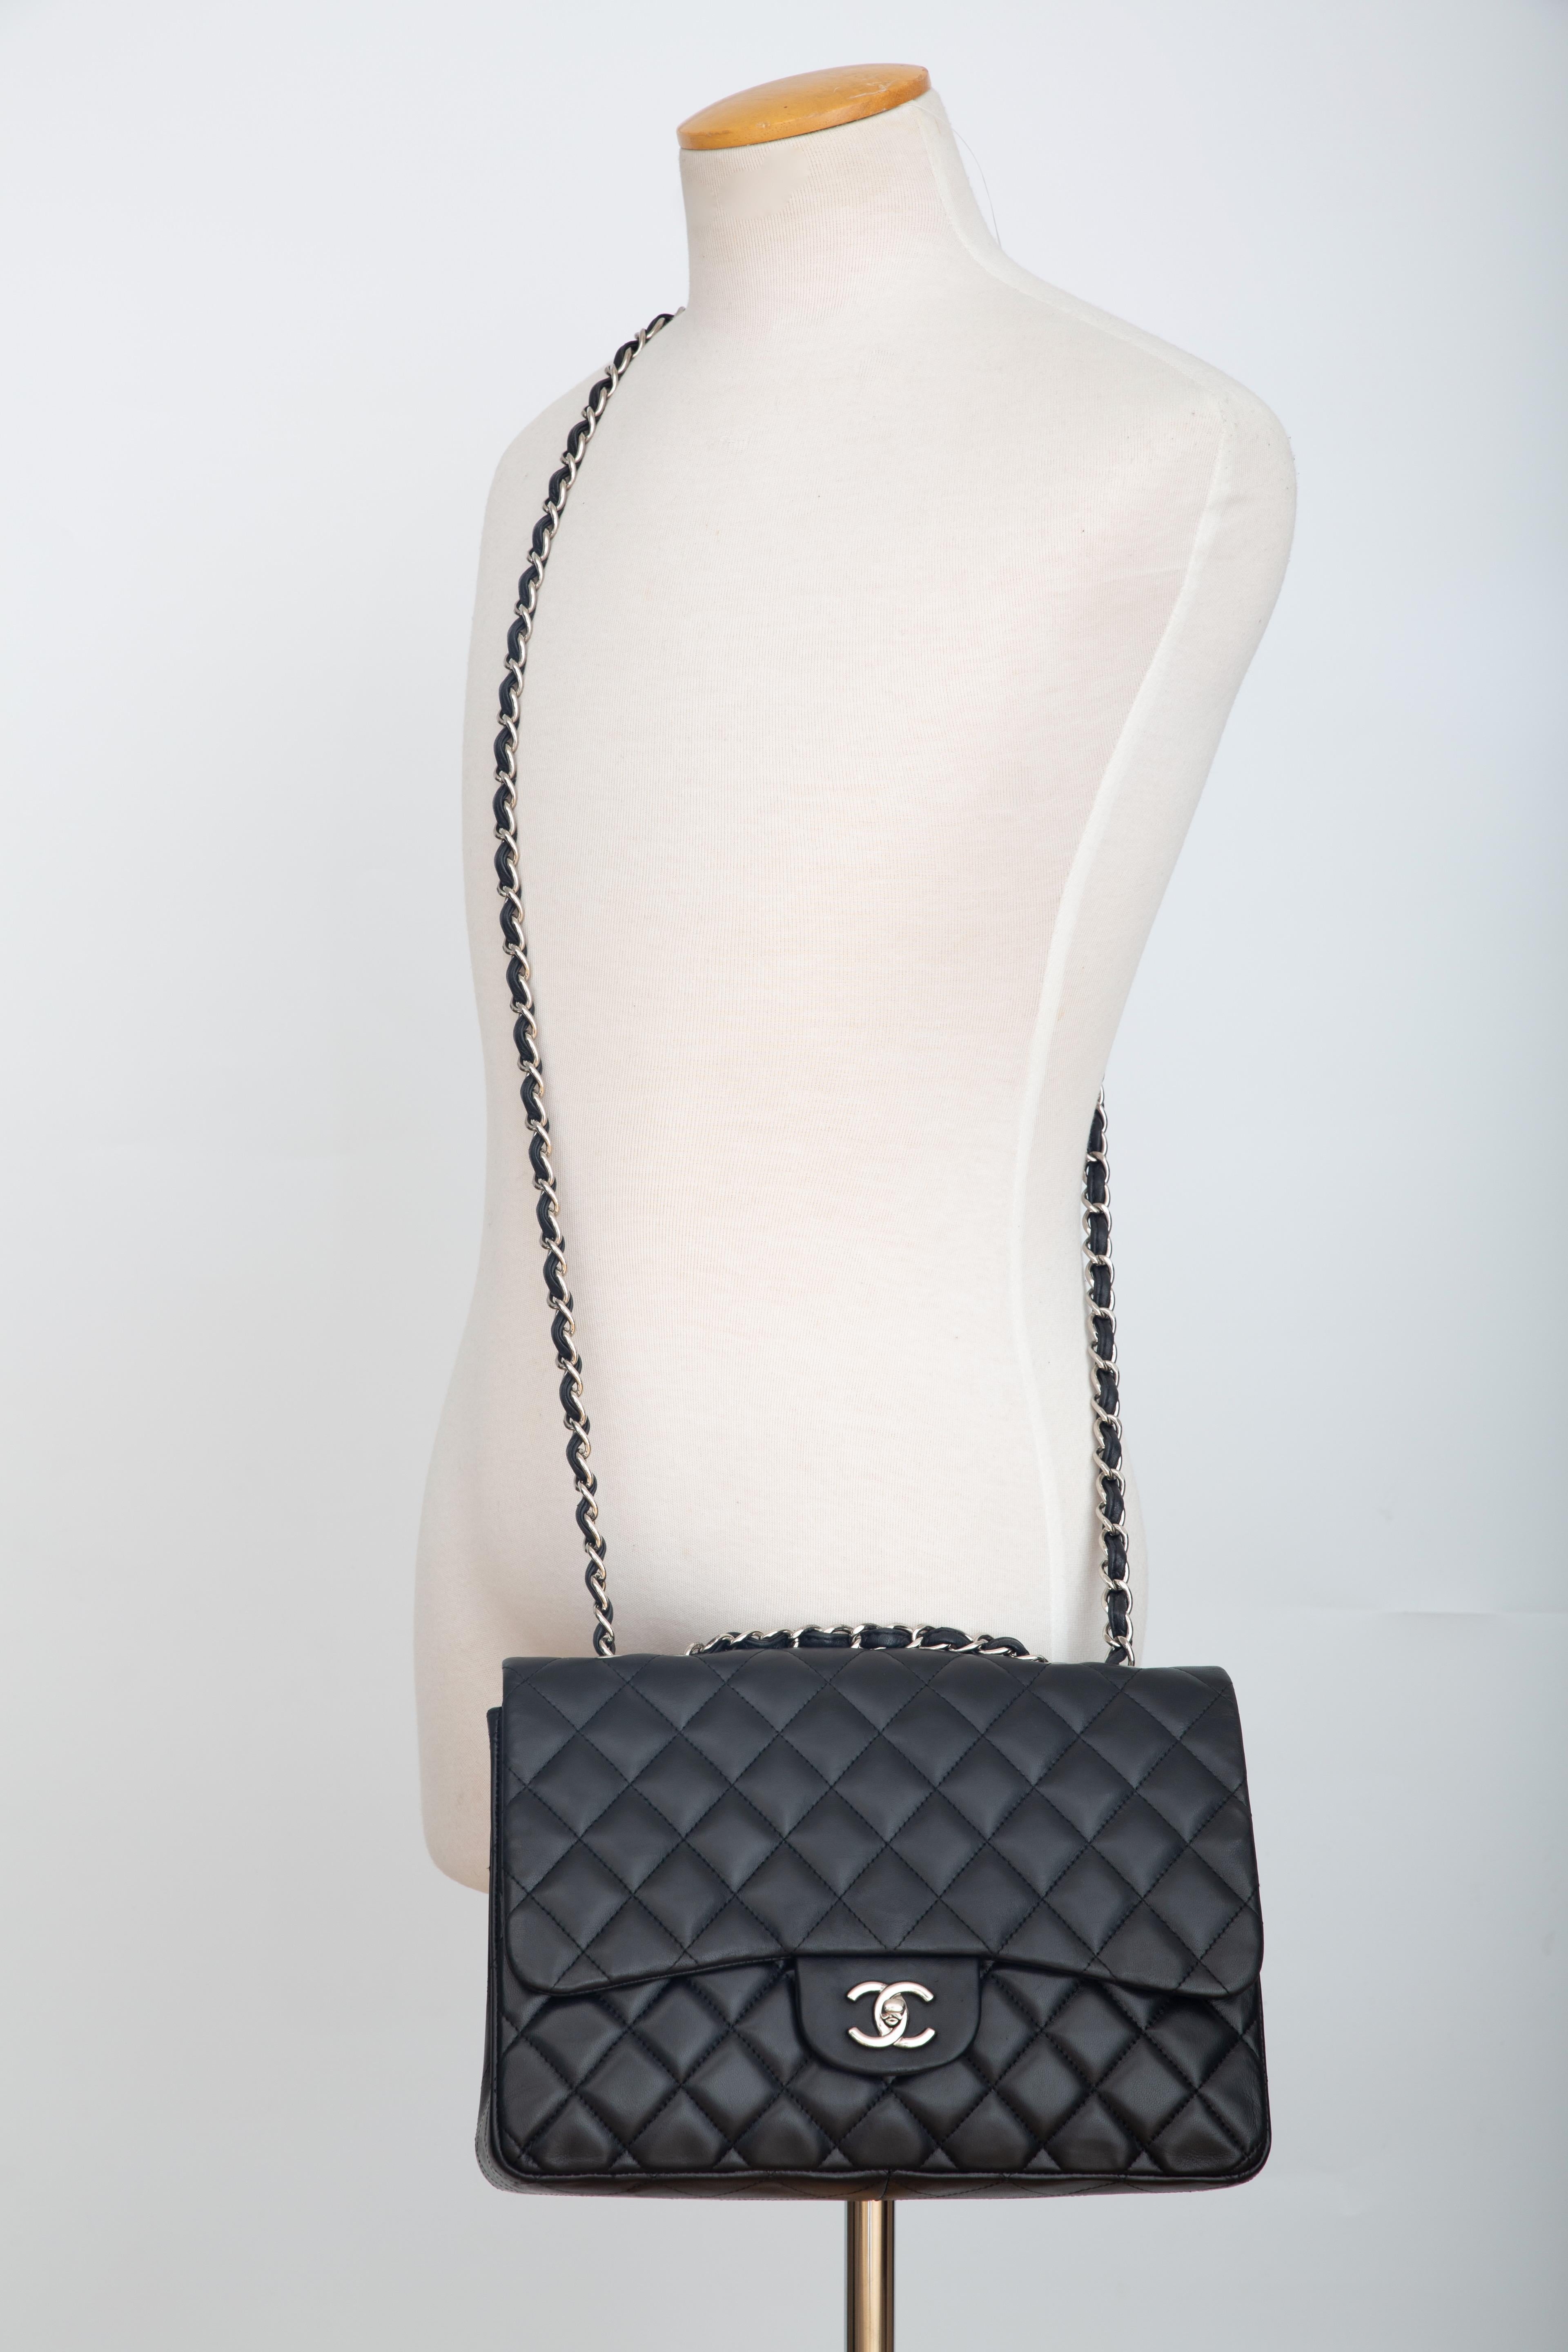 Chanel Lambskin Black Quilted Jumbo Single Flap (Circa 2009) For Sale 3